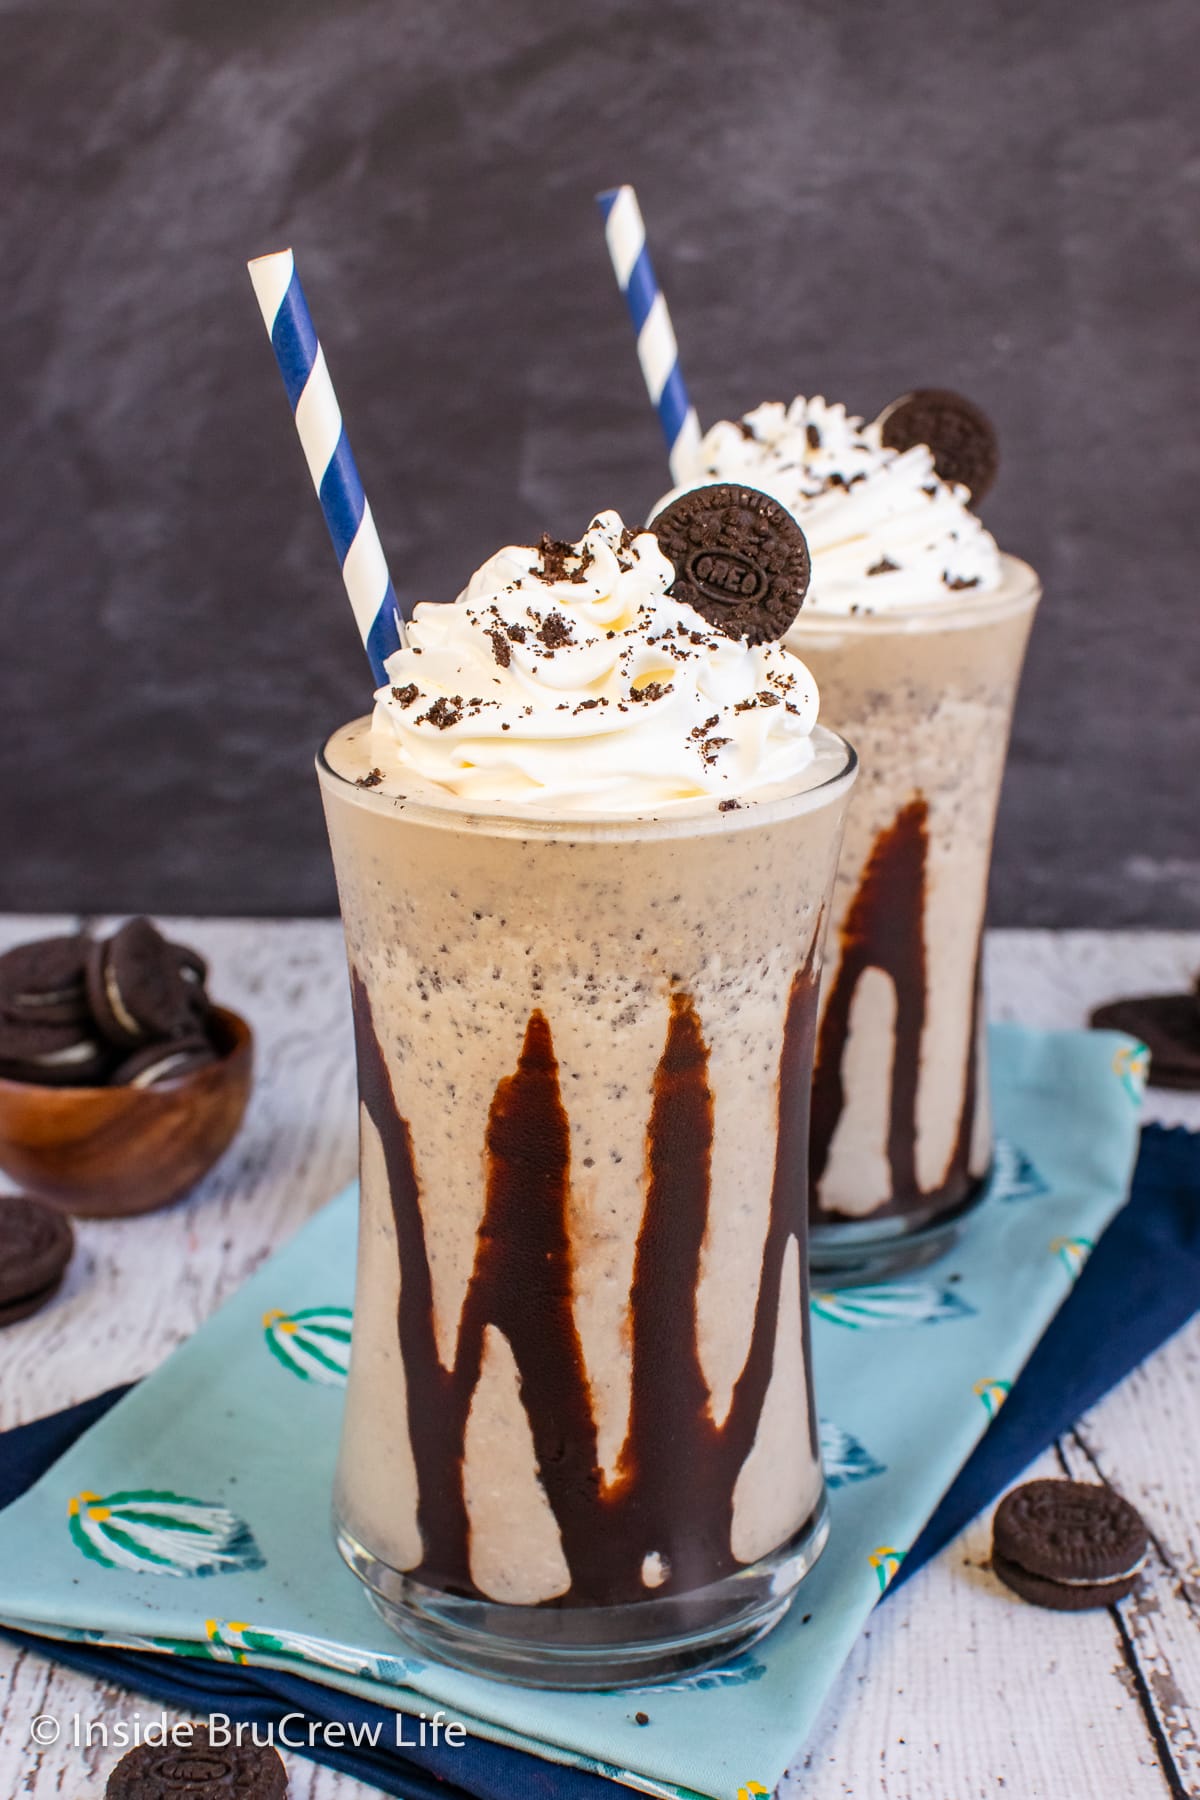 A cookie shake in a clear cup with chocolate drizzles.